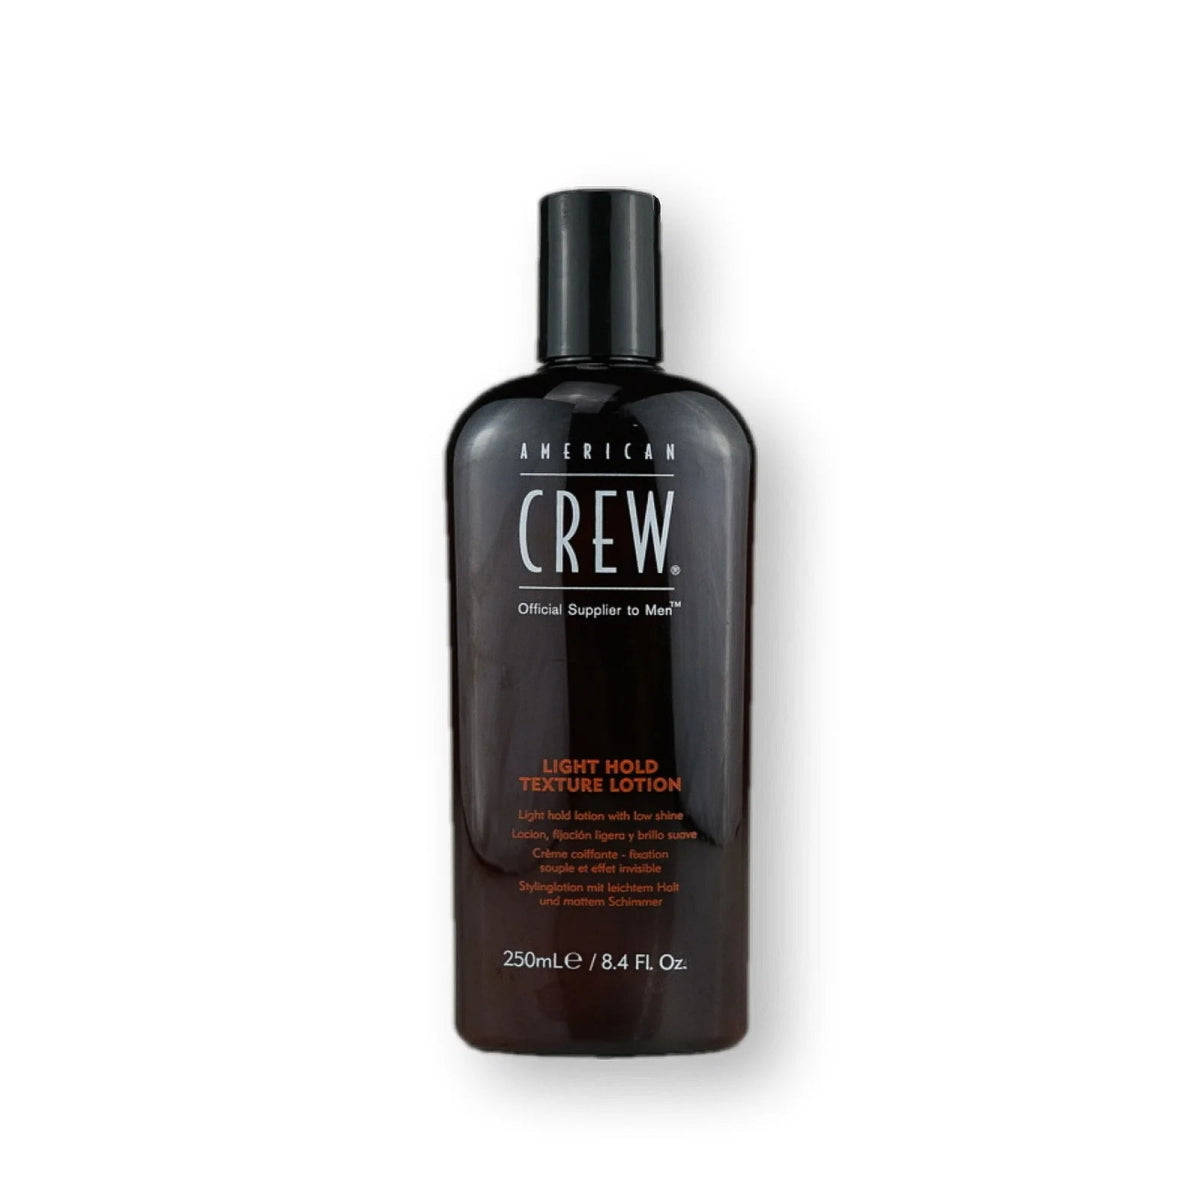 American Crew Light Hold Texture Lotion 250ml - Southwestsix Cosmetics American Crew Light Hold Texture Lotion 250ml American Crew Southwestsix Cosmetics 738678148907 American Crew Light Hold Texture Lotion 250ml